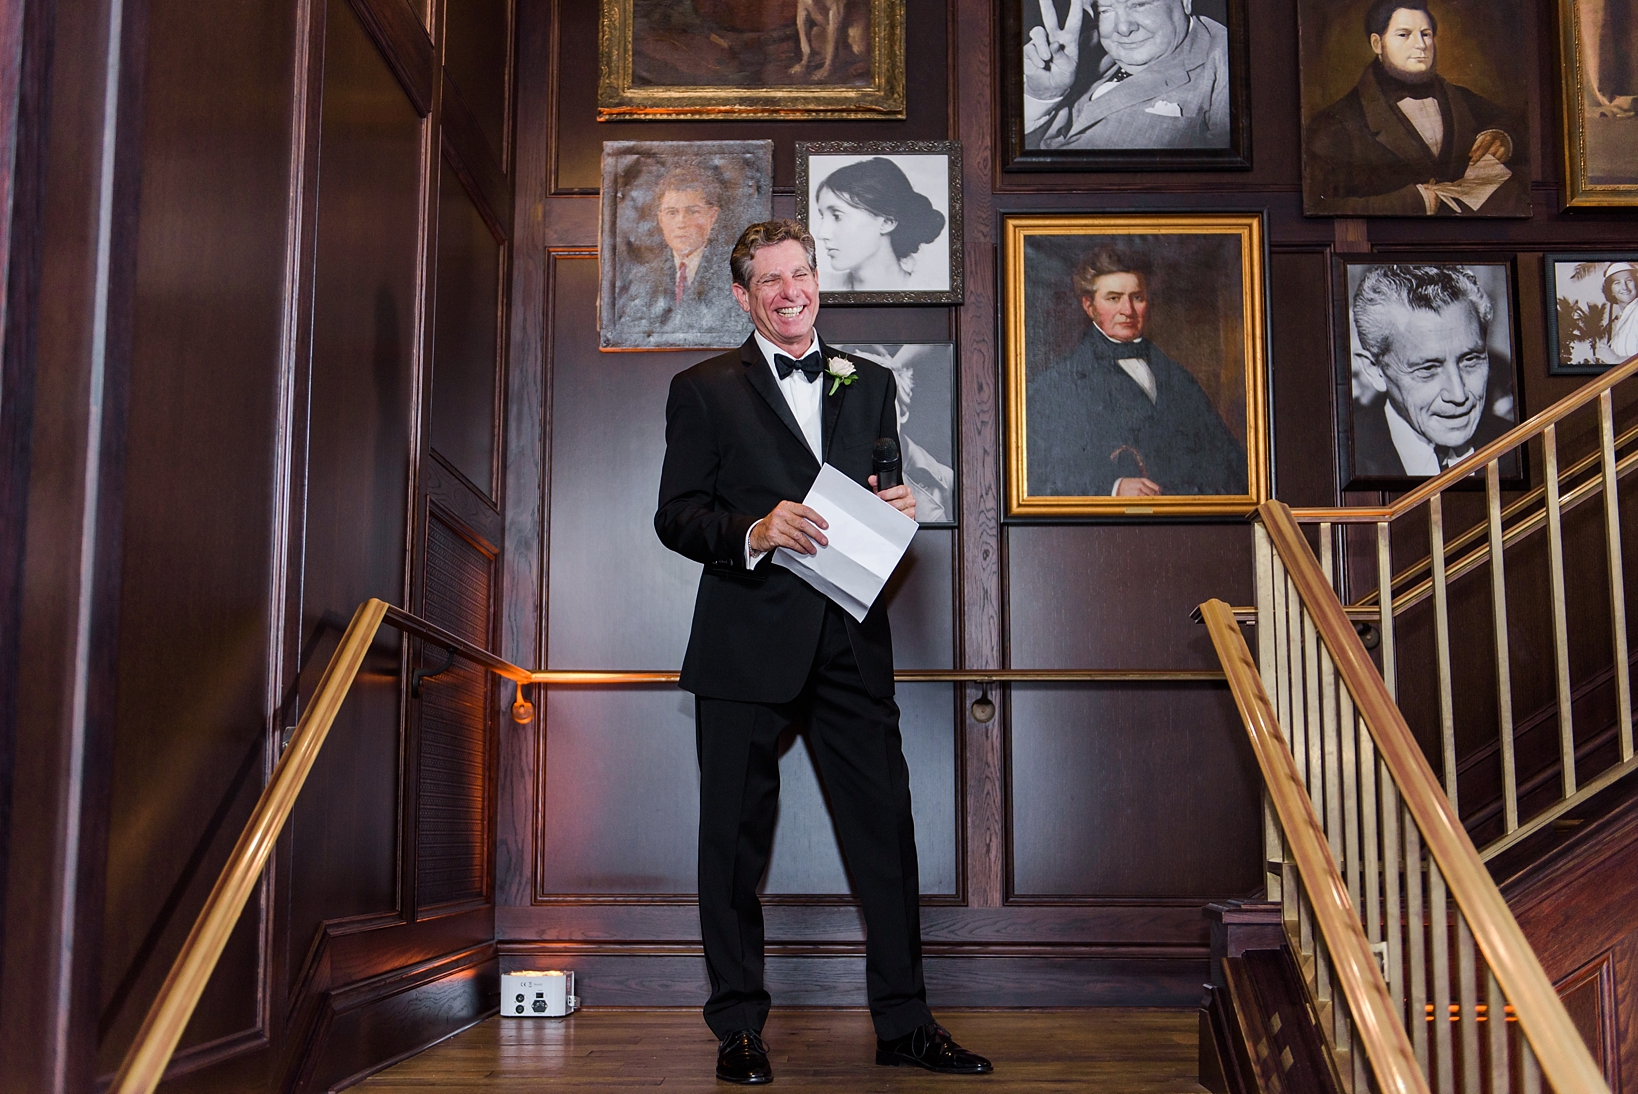 The Father of the Bride gives his speech on the stairs of the Oxford Exchange during a wedding reception